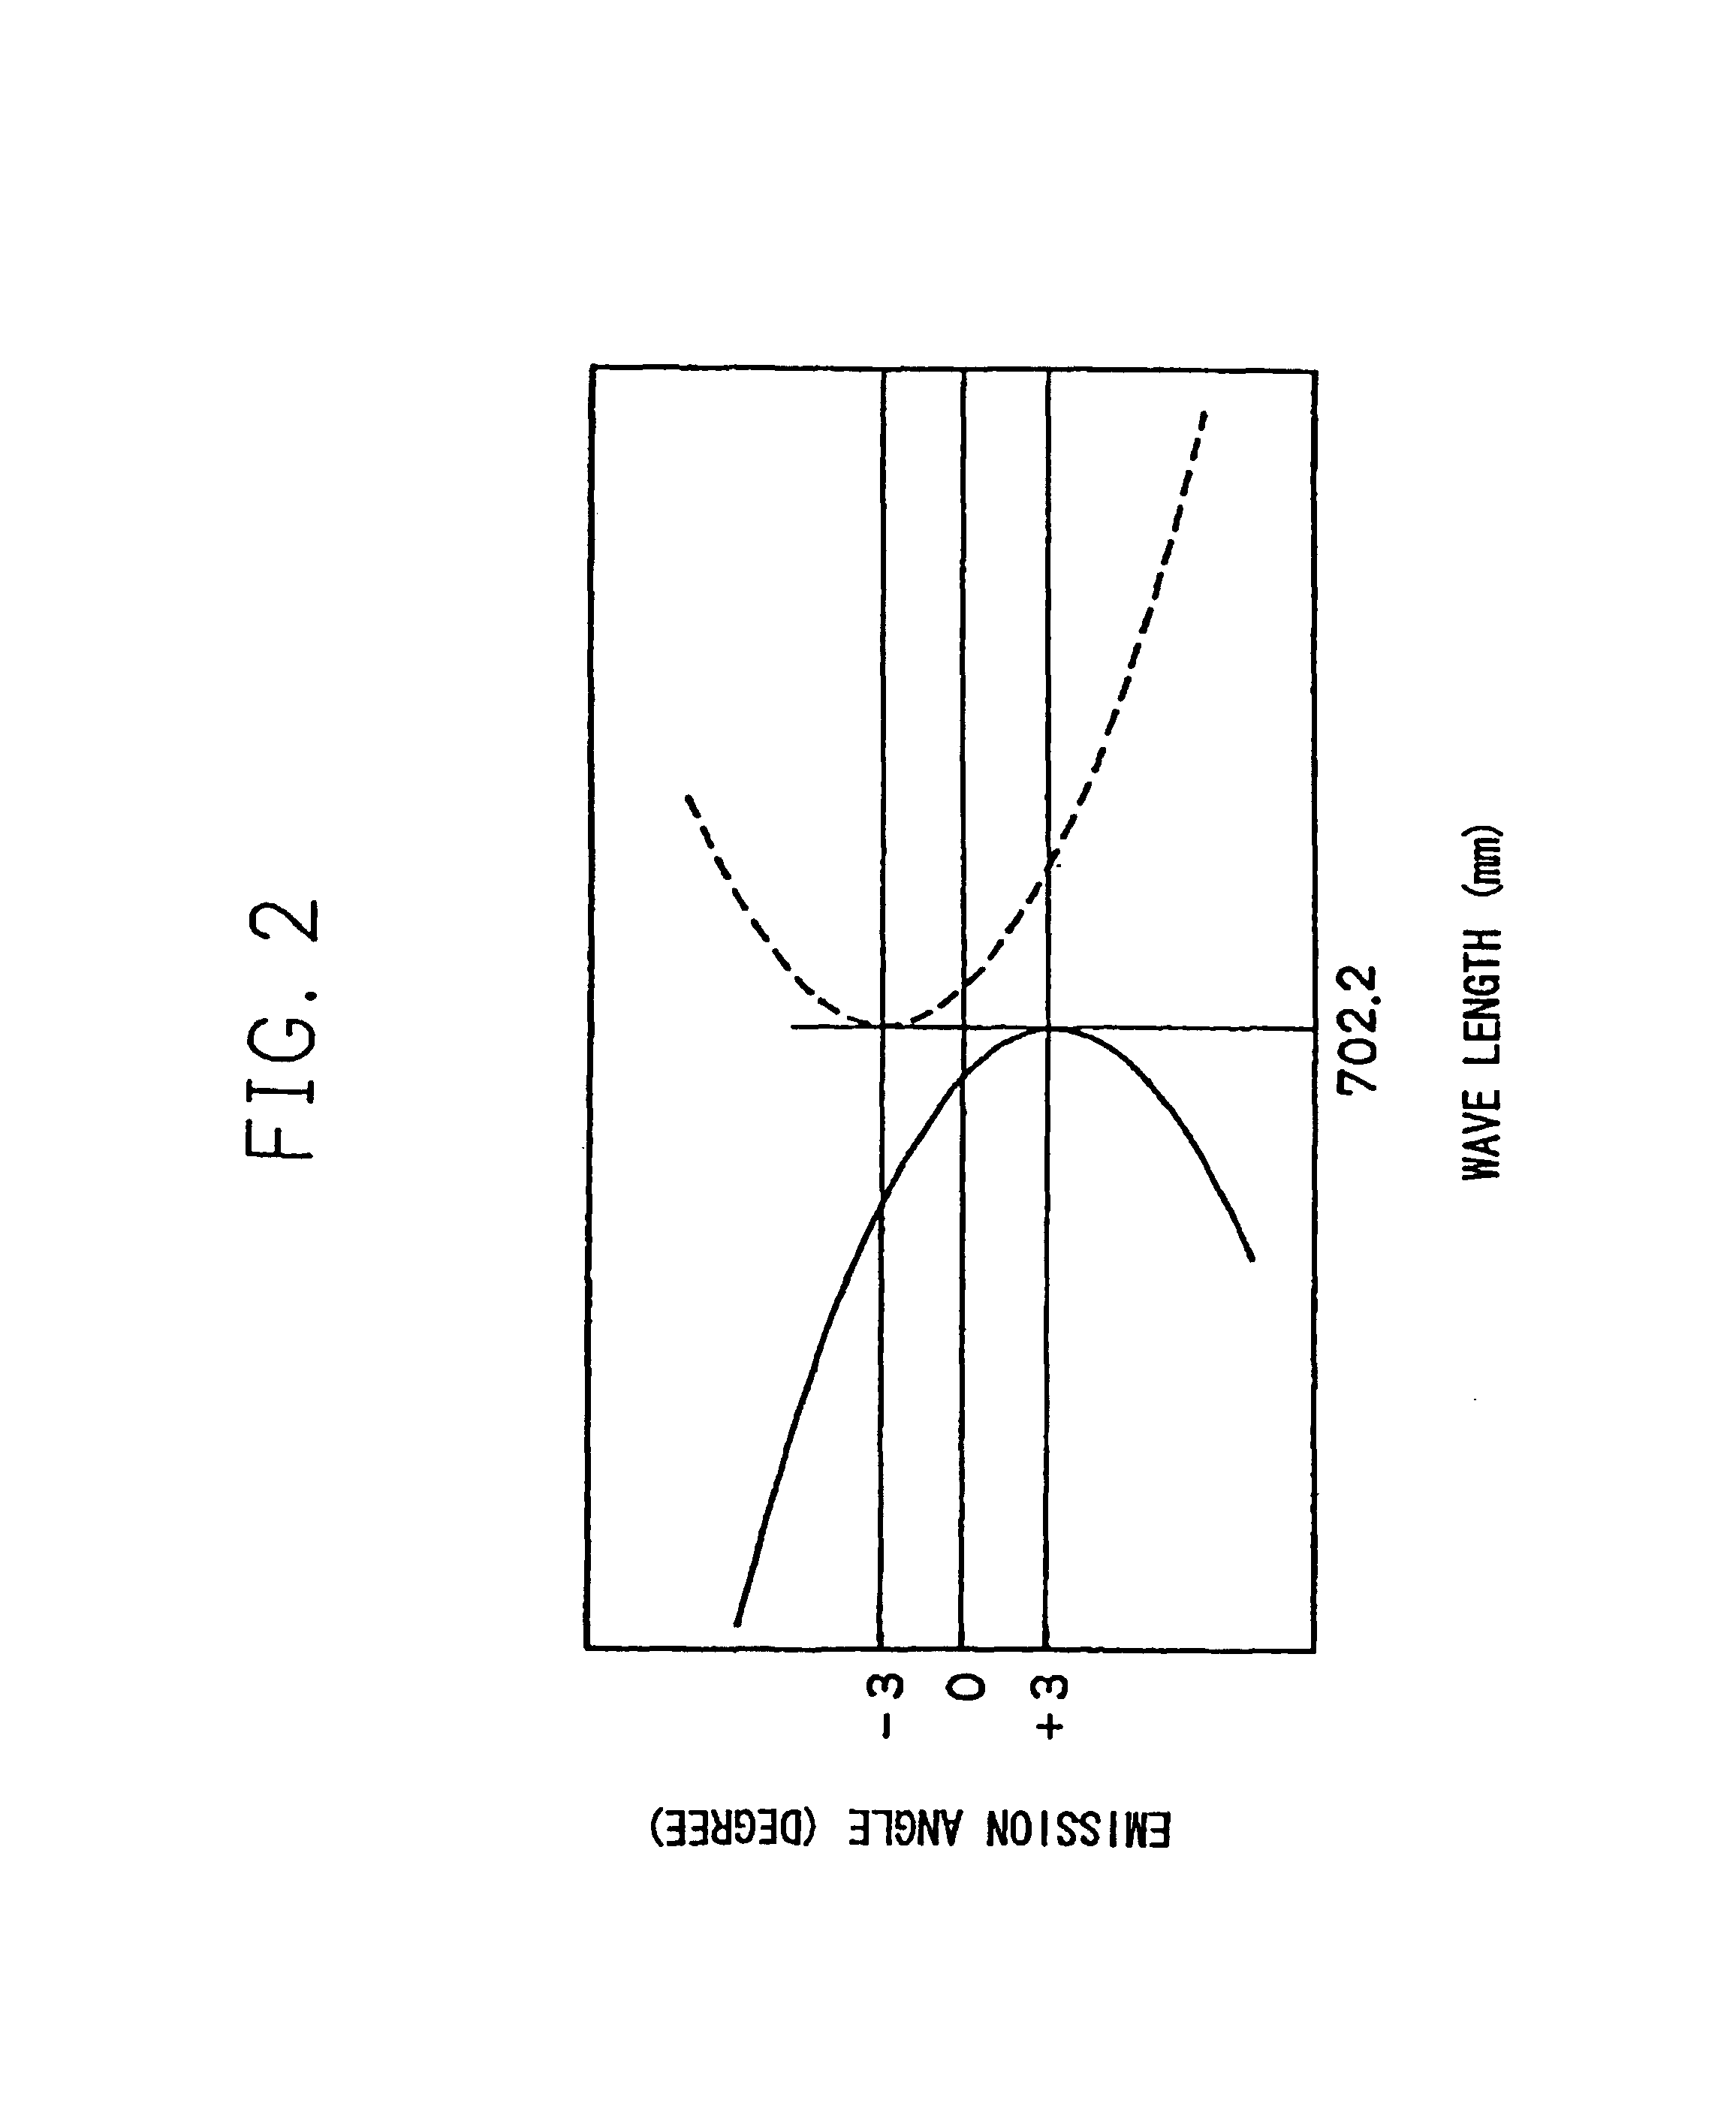 Generator for producing photon number state